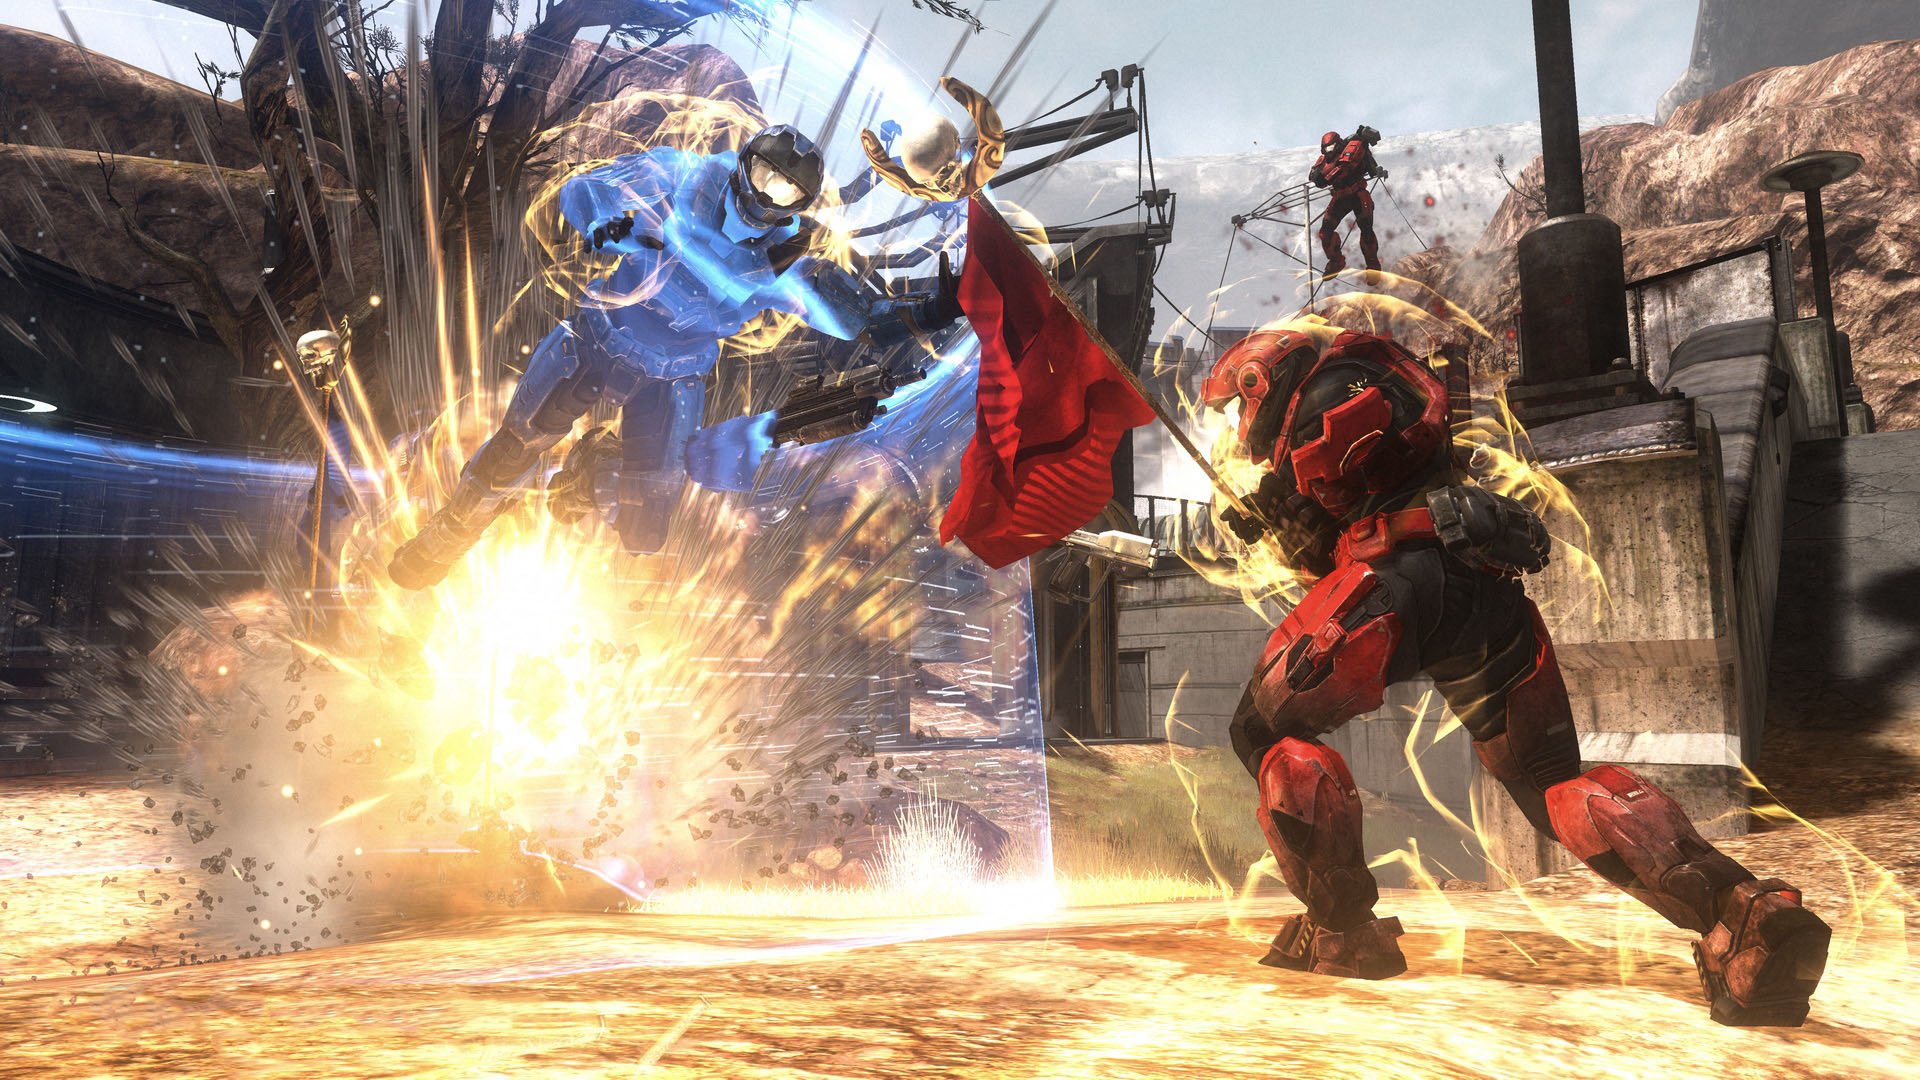 Halo: Reach PC impressions: The prodigal son returns to the PC, with some  quirks